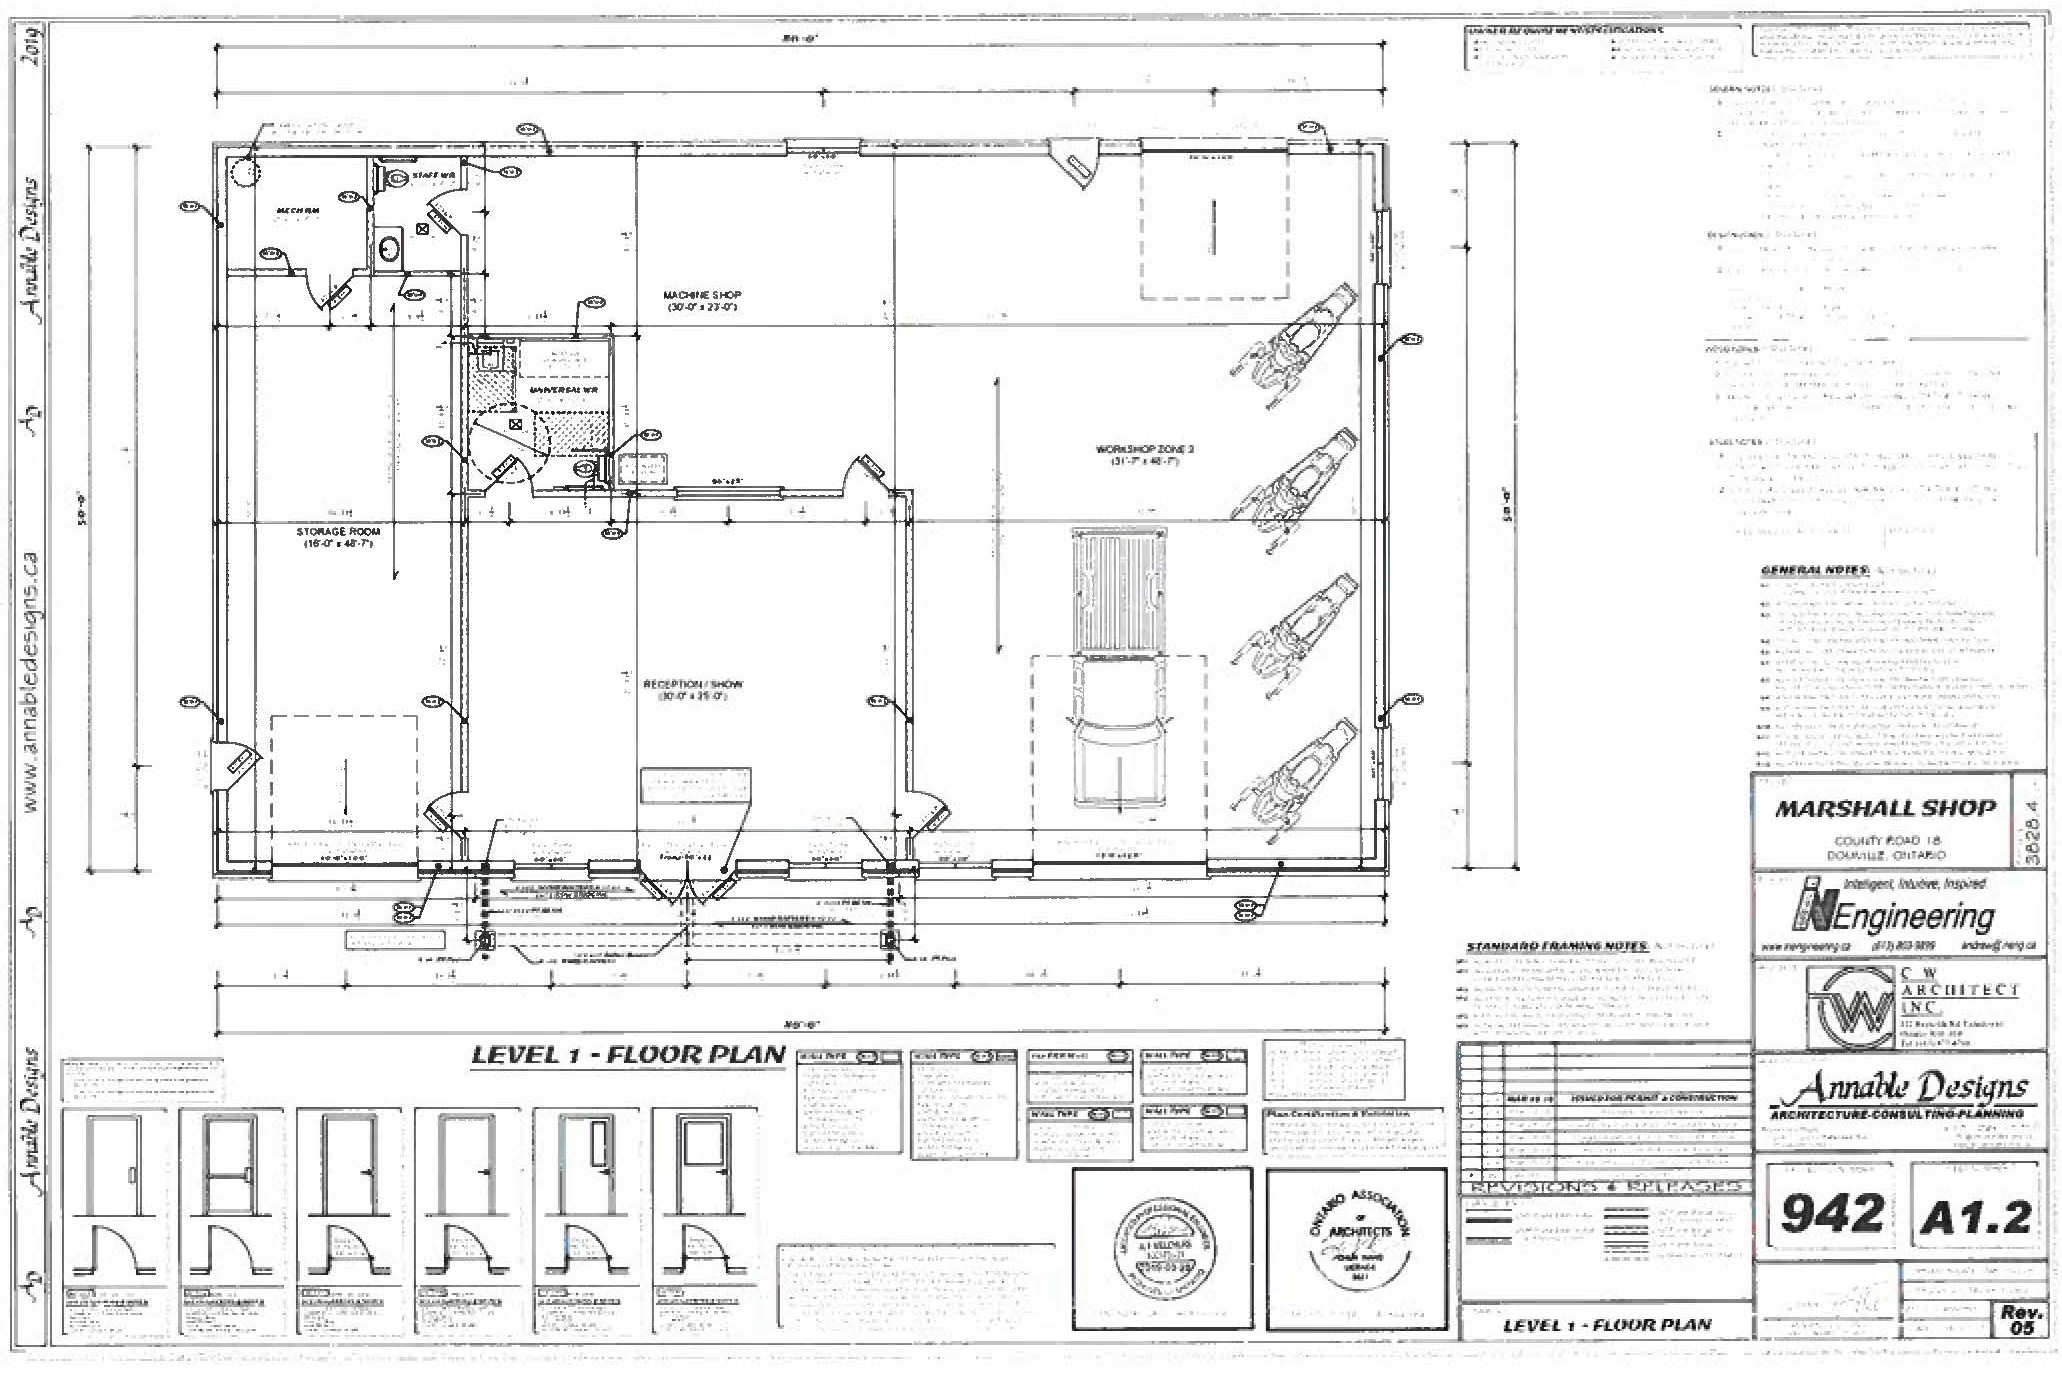 Site Plan Control Agreement maps page 05